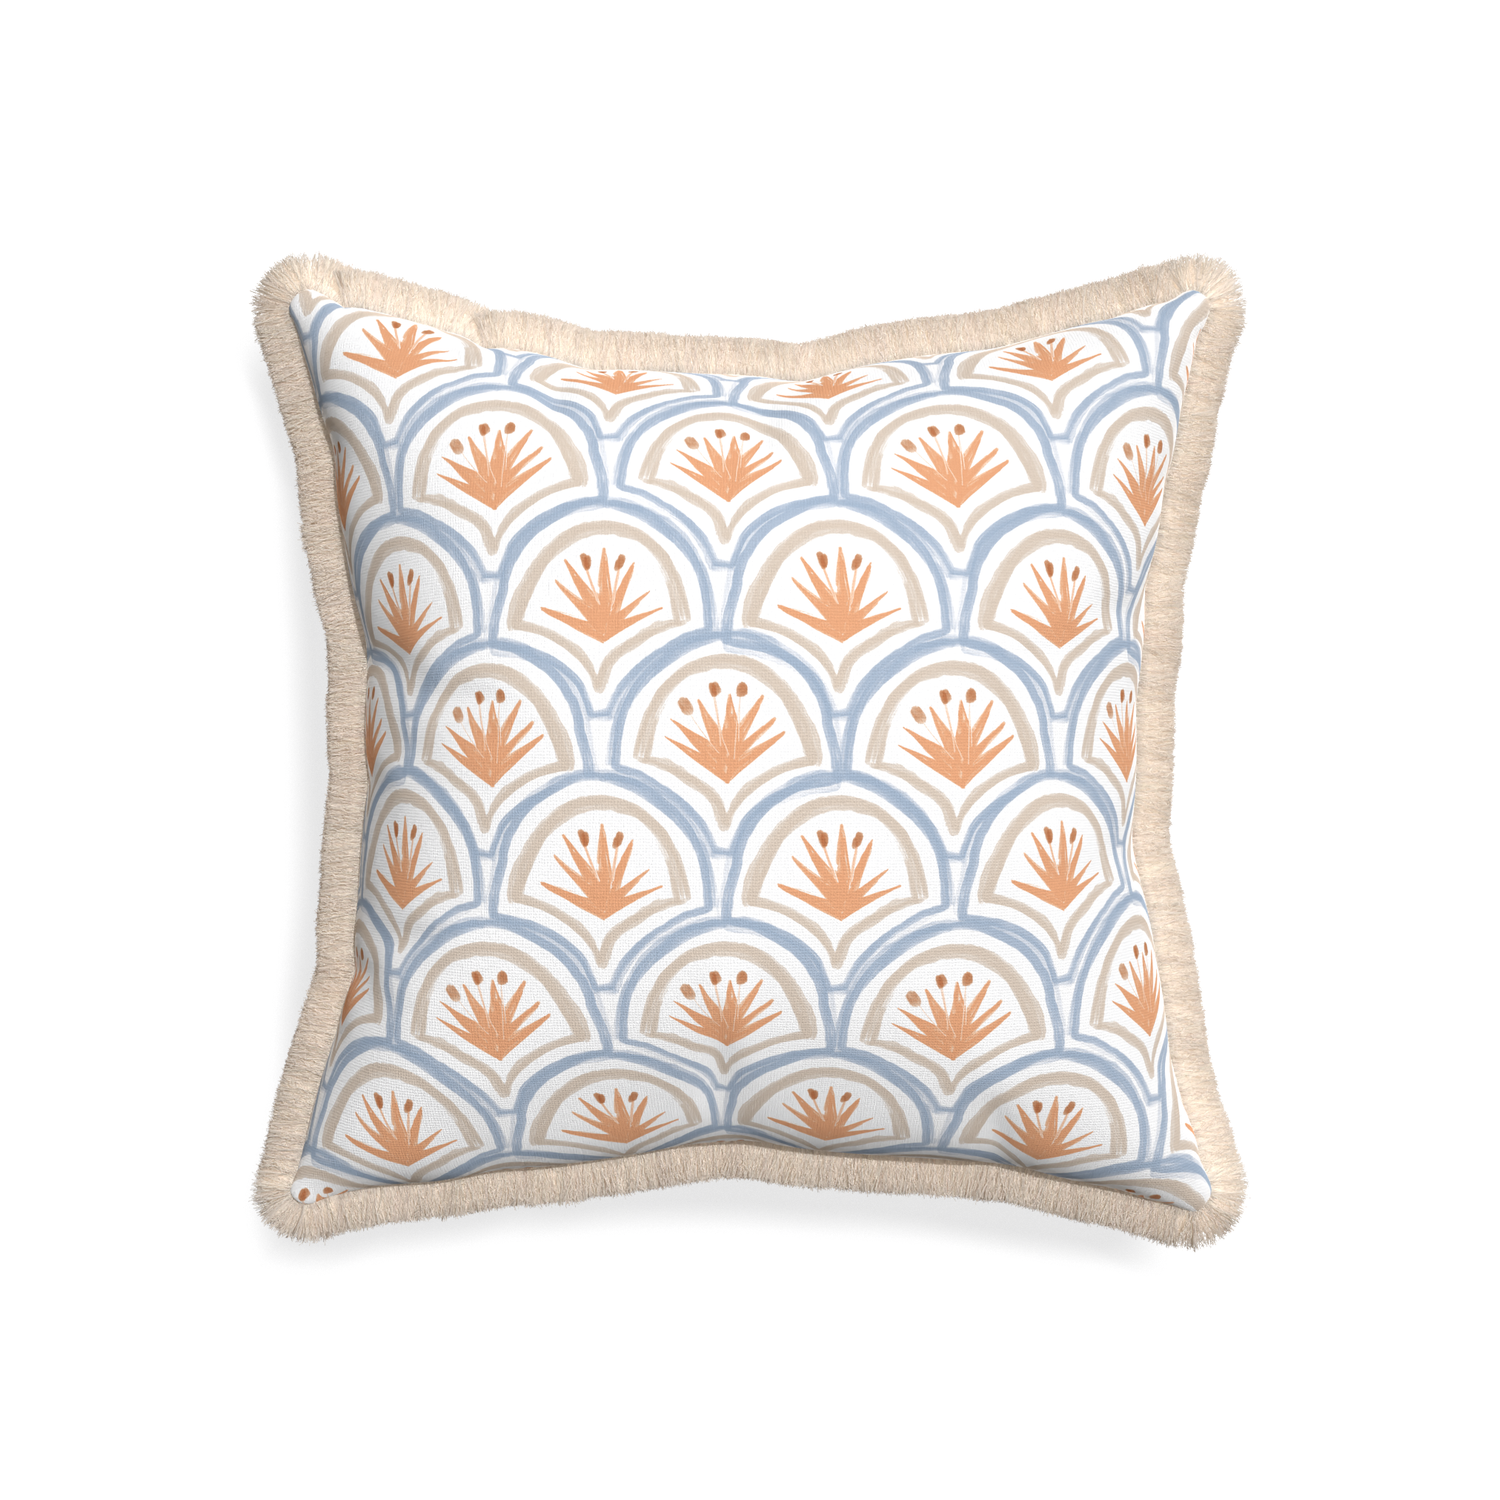 20-square thatcher apricot custom art deco palm patternpillow with cream fringe on white background